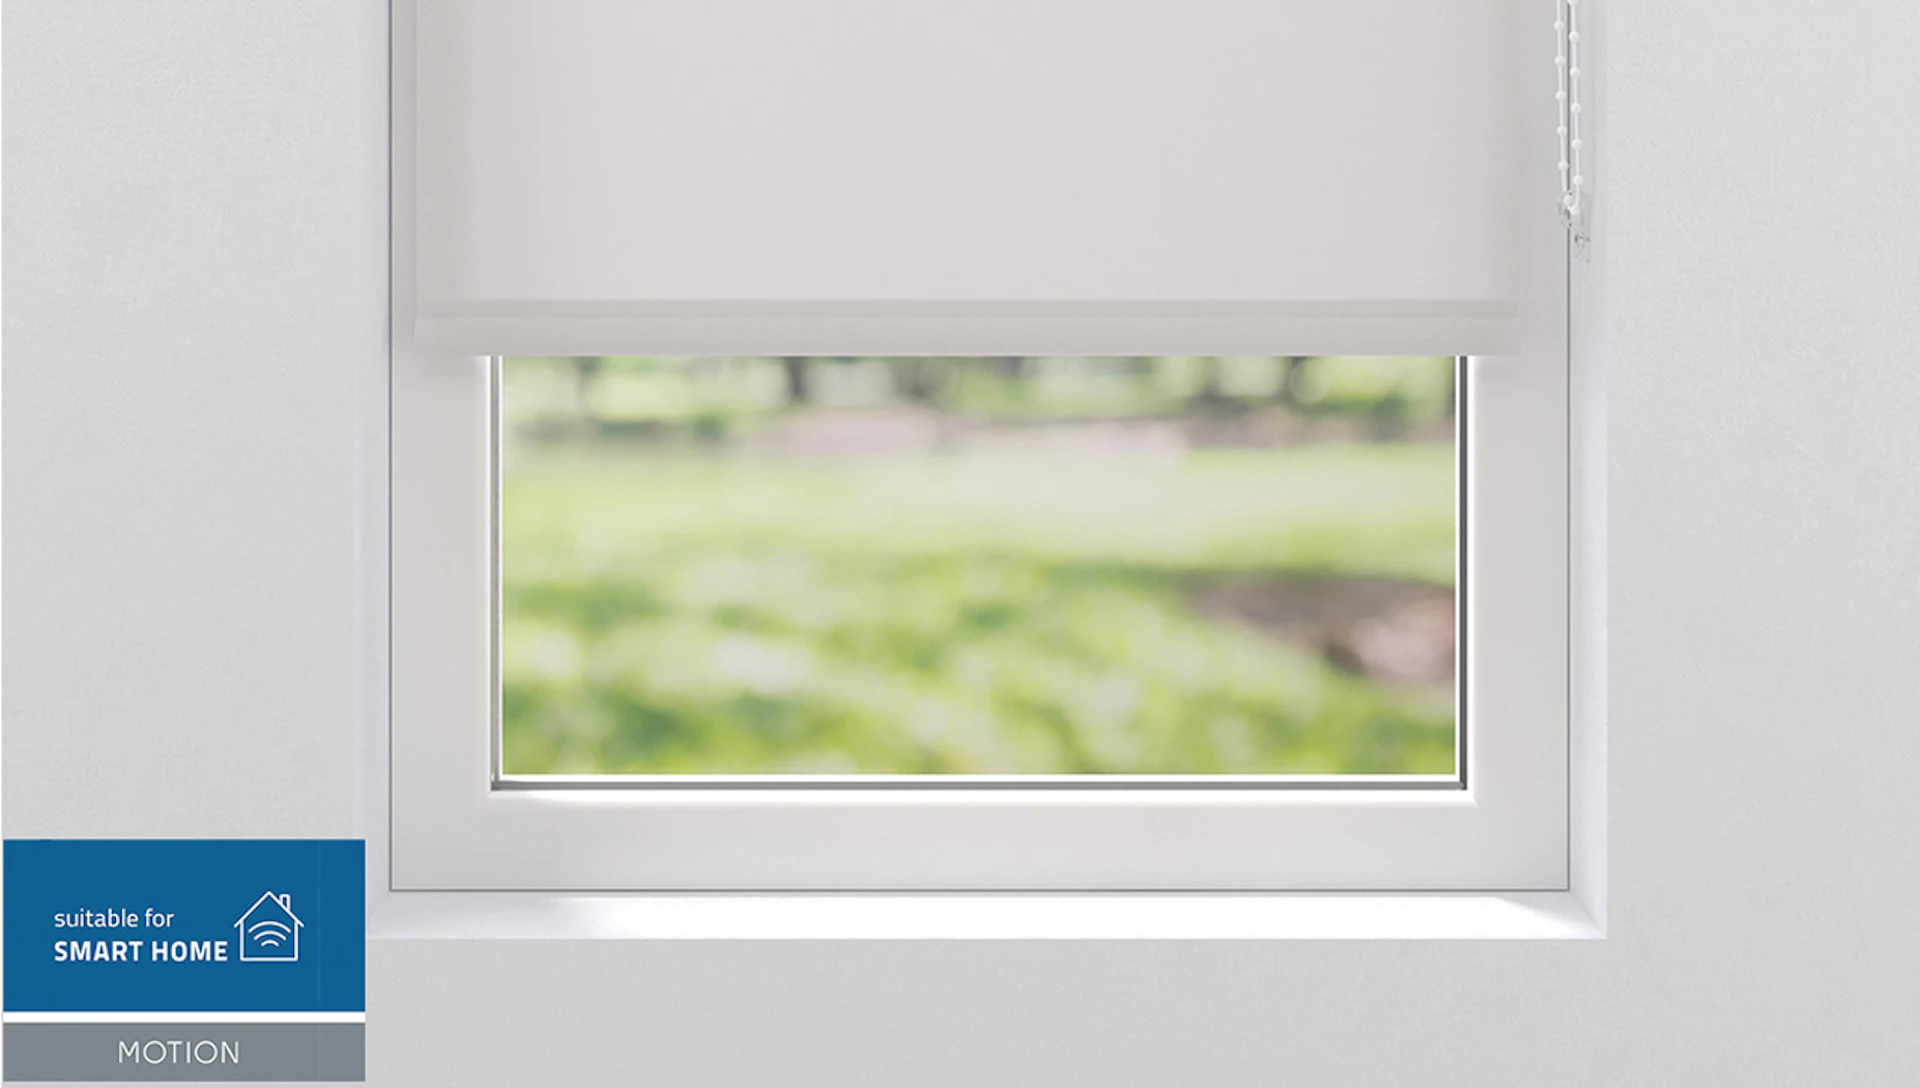 planeo roller blind 25mm TL - white